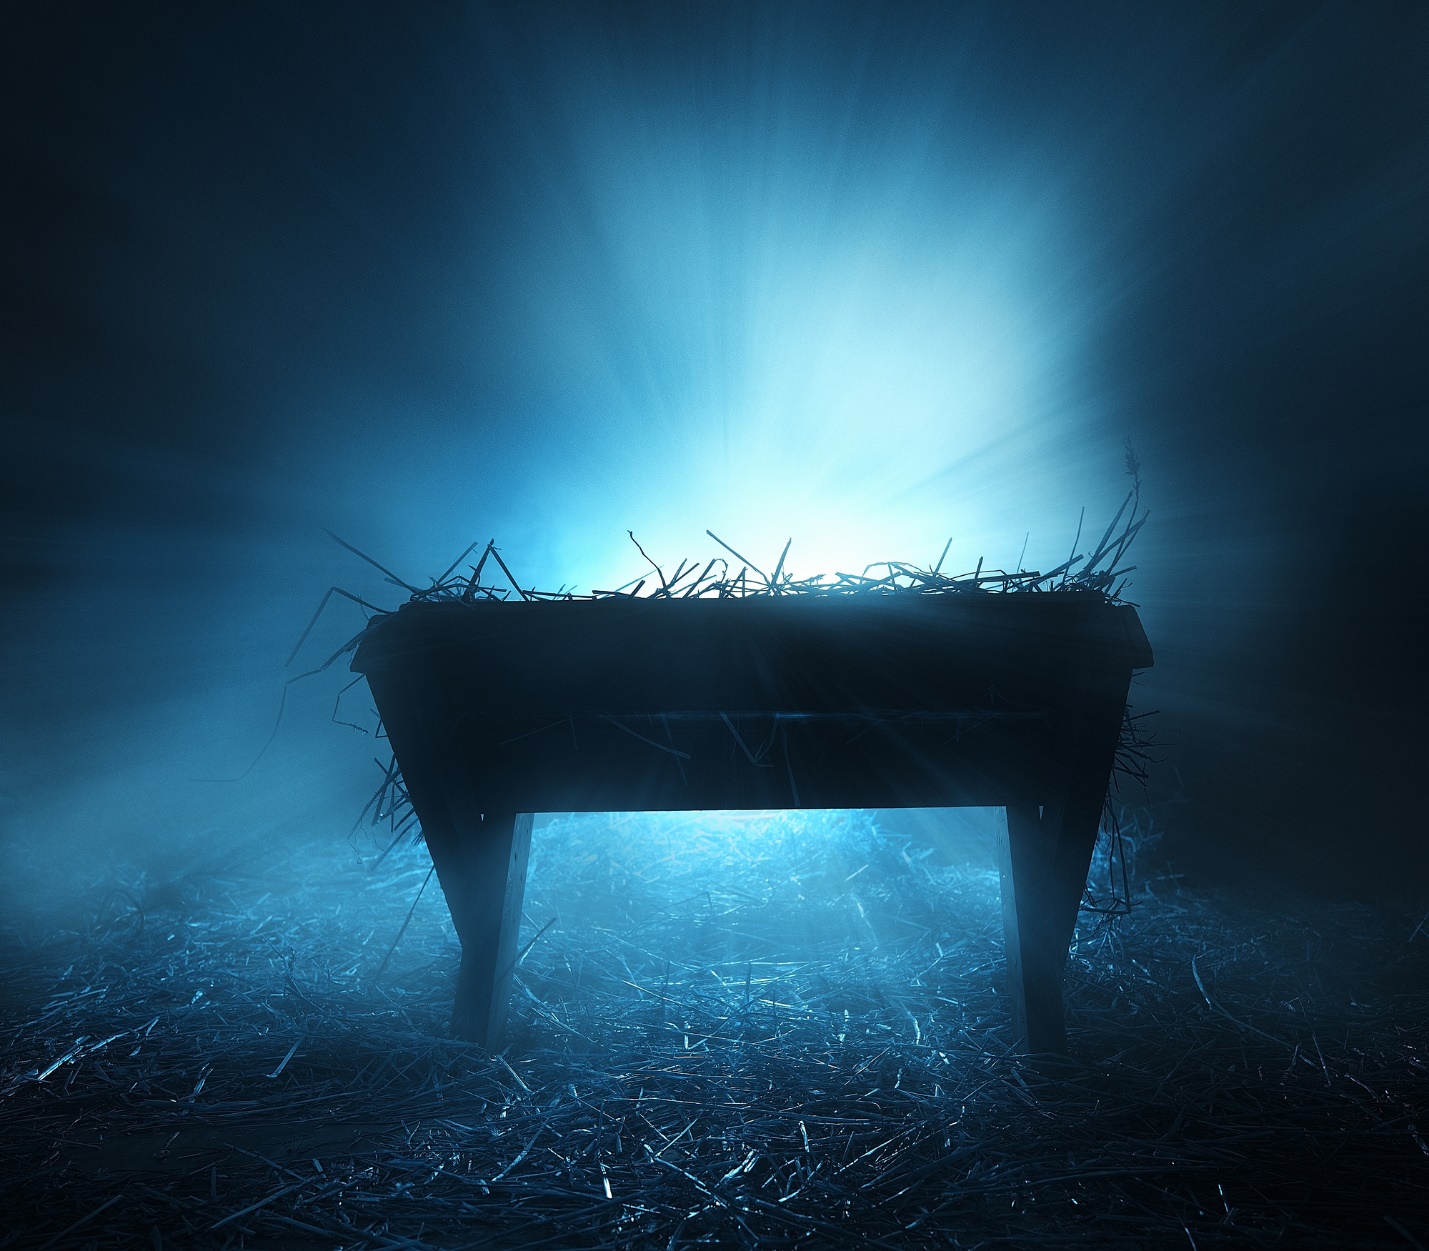 A bench in the dark

Description automatically generated with low confidence